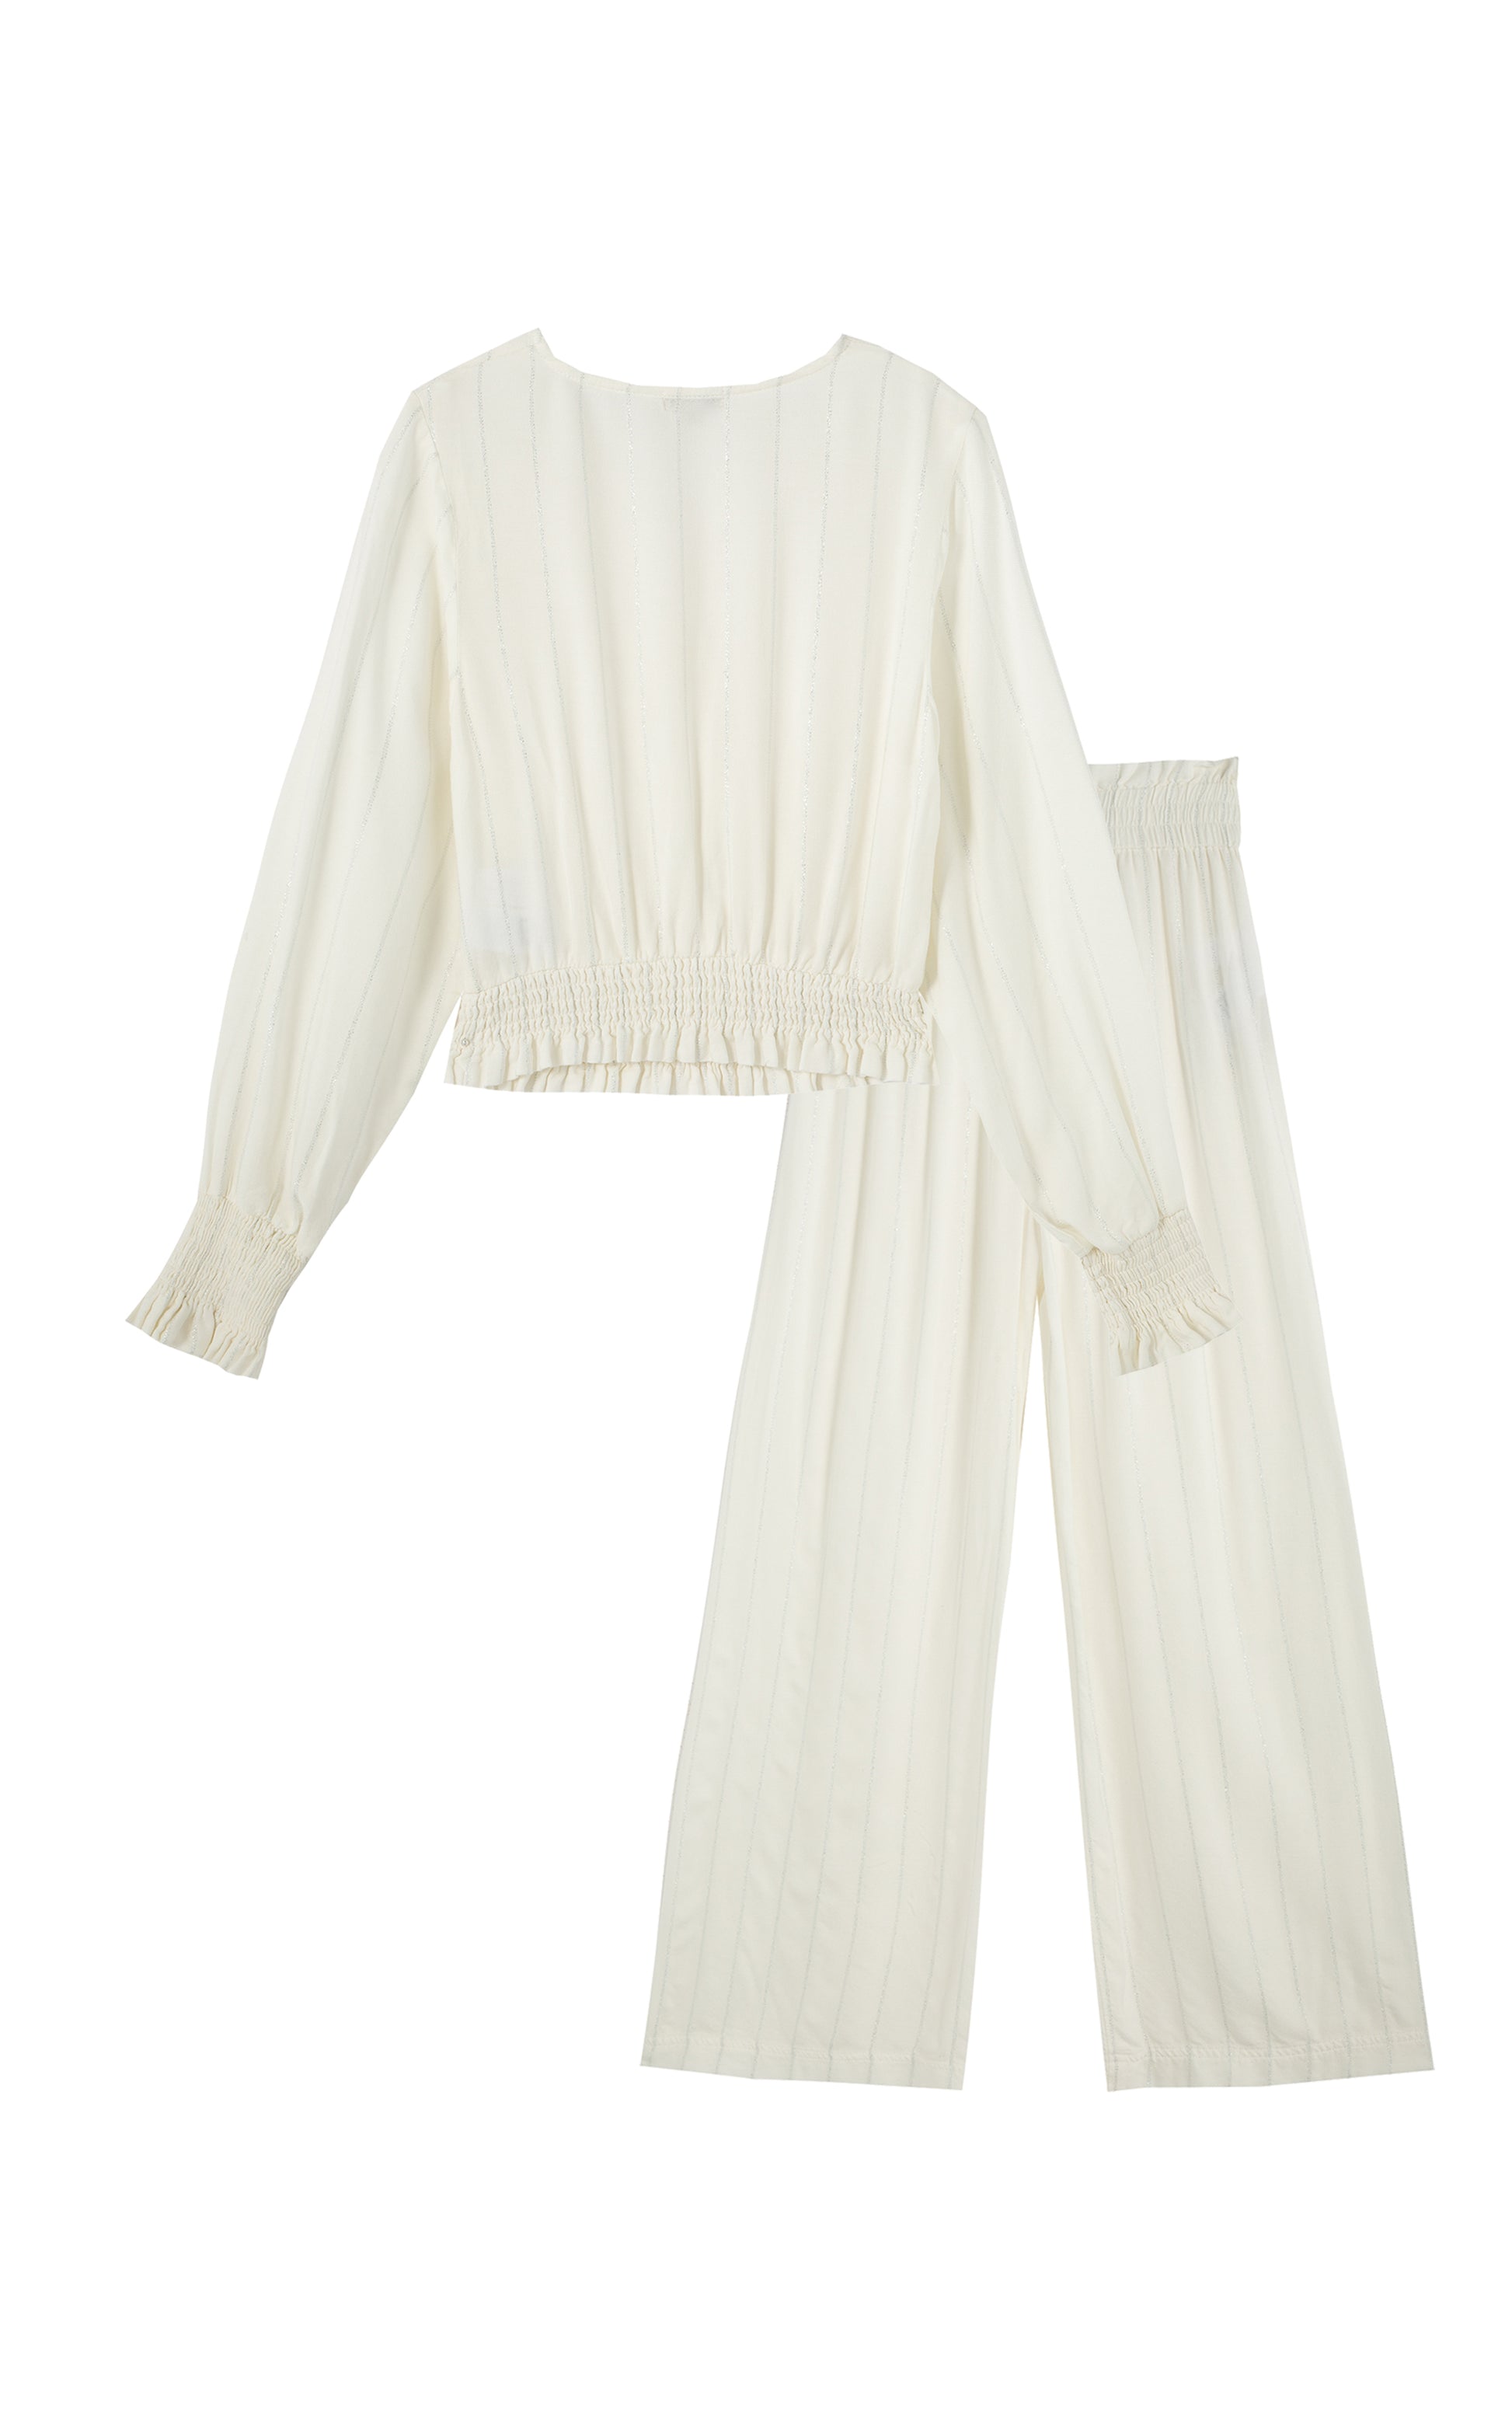 BACK OF WHITE WITH PALE GREY STRIPES LONG SLEEVE TOP AND MATCHING BAGGY WIDE LEG PANTS WITH SMOCKED WAIST